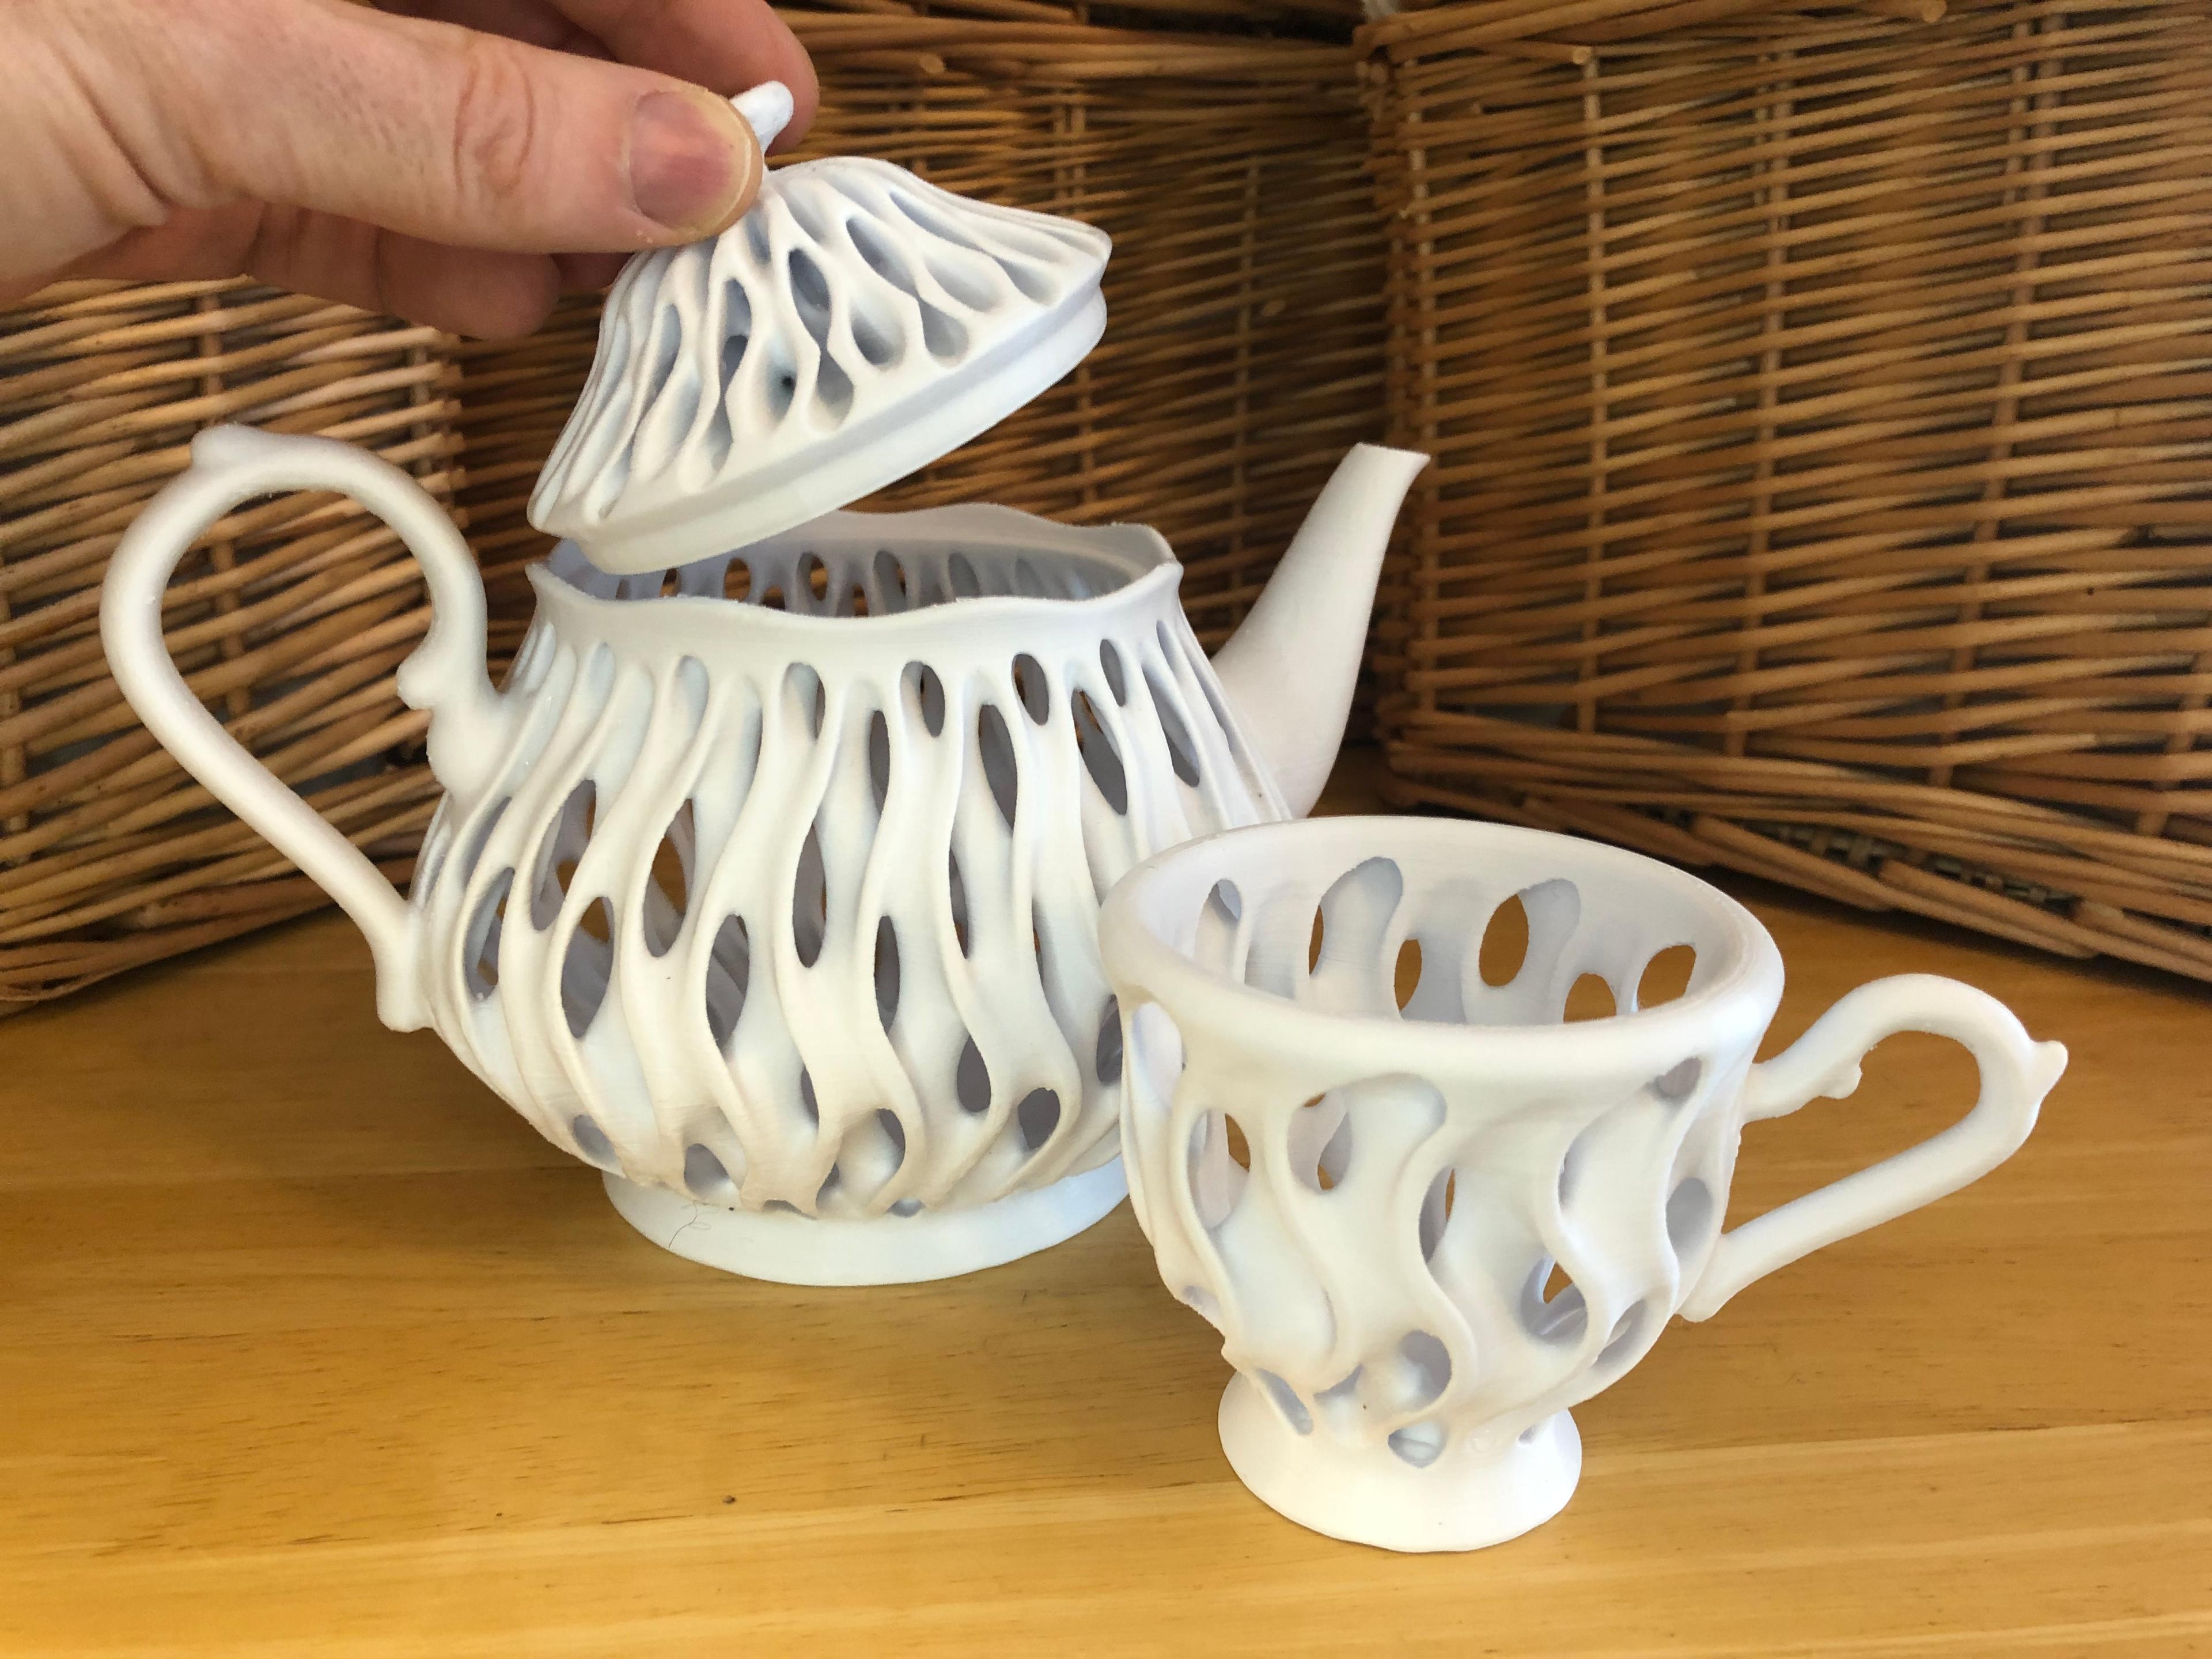 Malfunctioning Teapot and Teacup 3d model